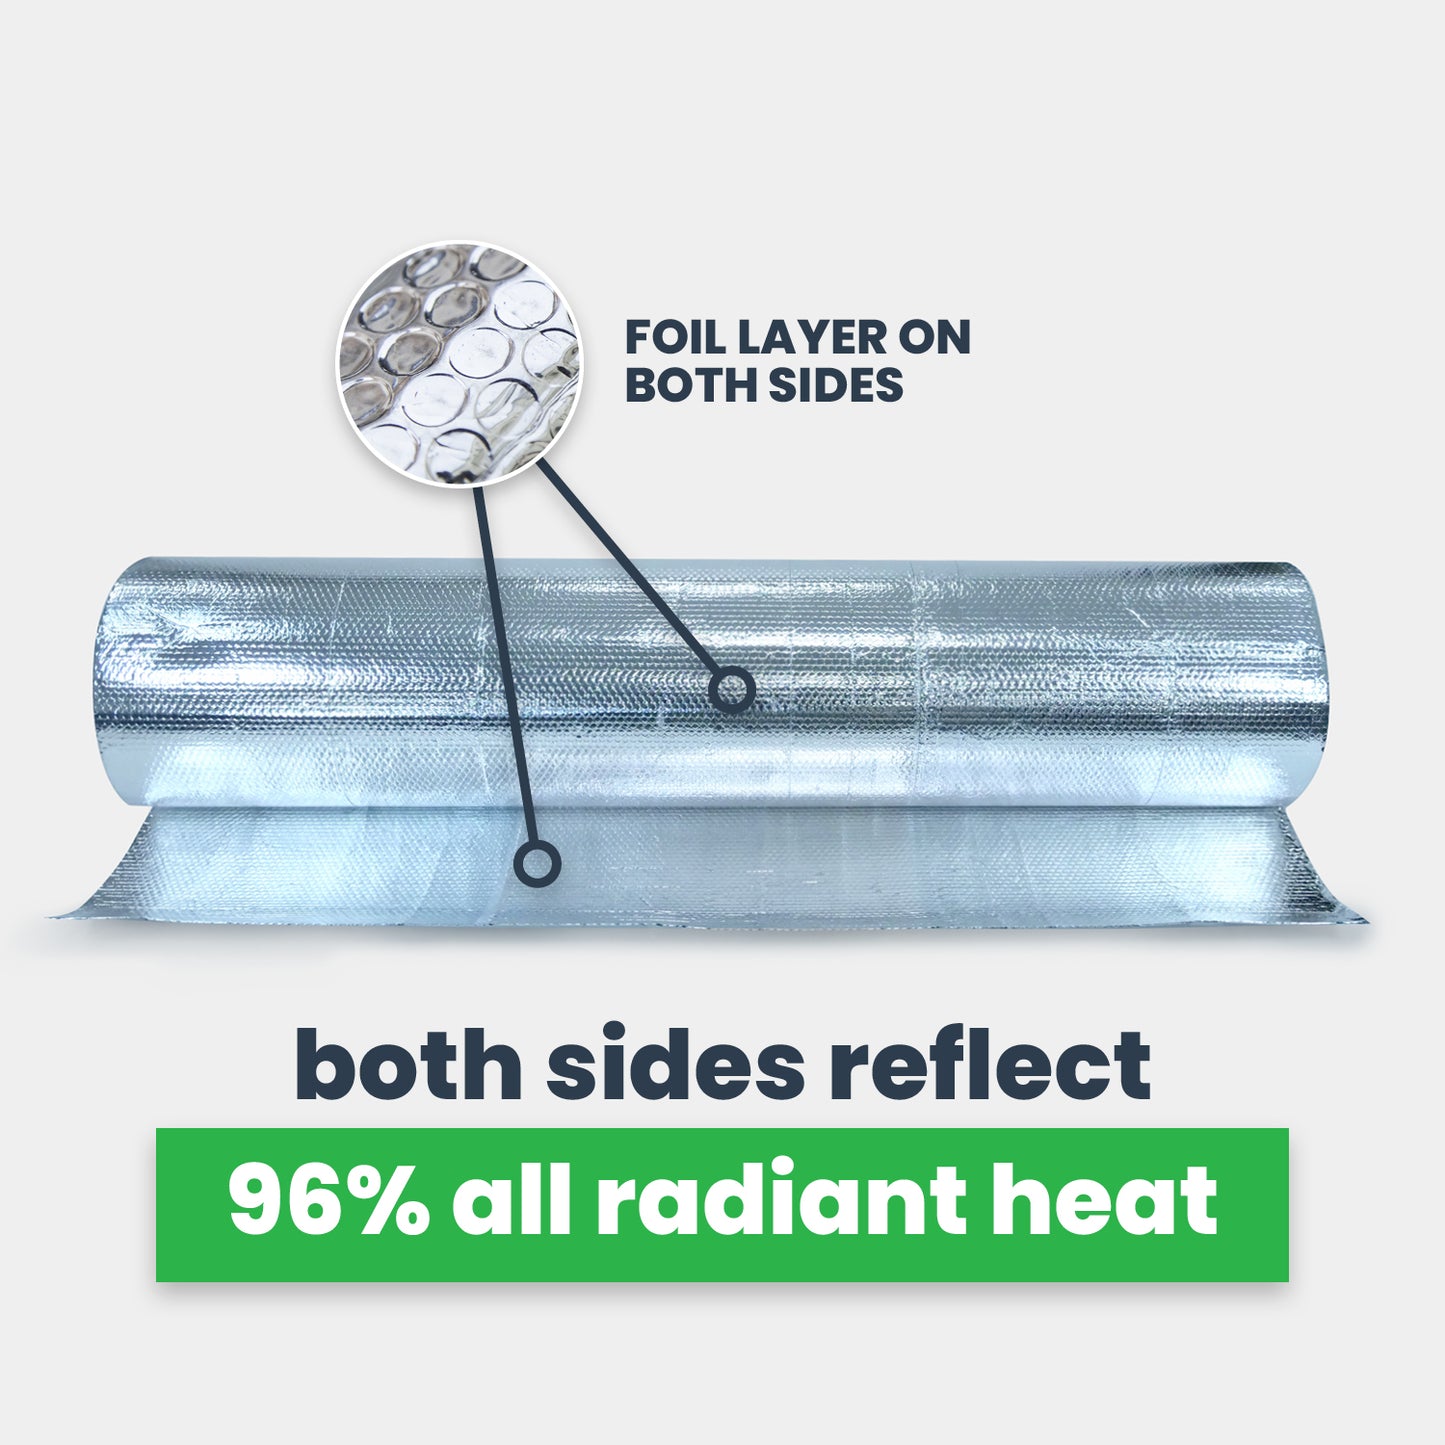 double bubble with foil on both sides reflects 96% radiant heat